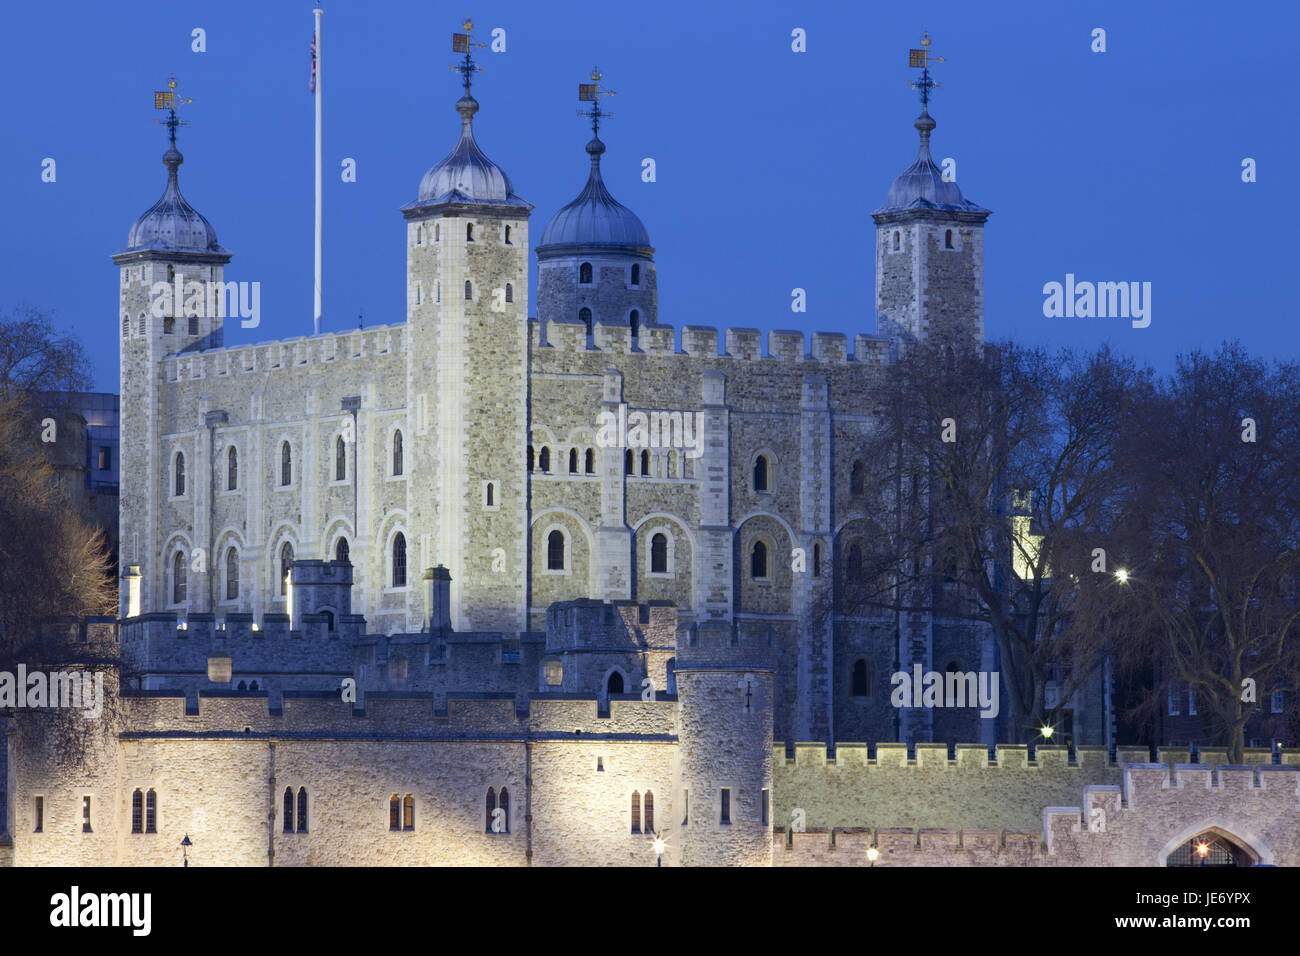 England, London, Tower of London, complex of buildings, UK, town, castle, building, palace, towers, defensive walls, place of interest, tourism, evening, dusk, Stock Photo